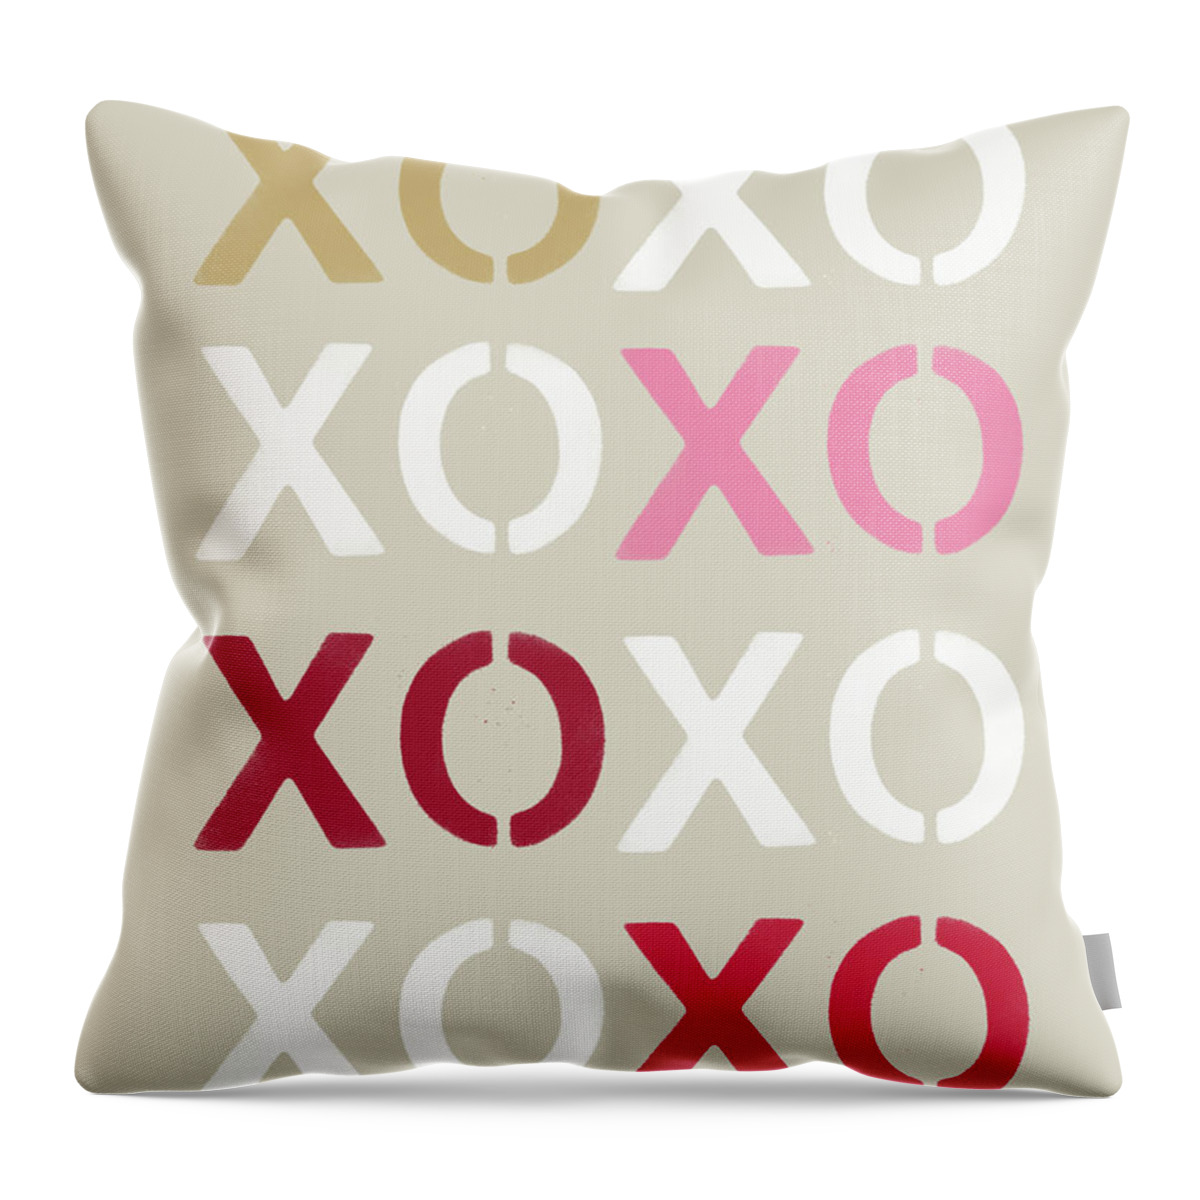 Love Throw Pillow featuring the mixed media XOXO- Art by Linda Woods by Linda Woods